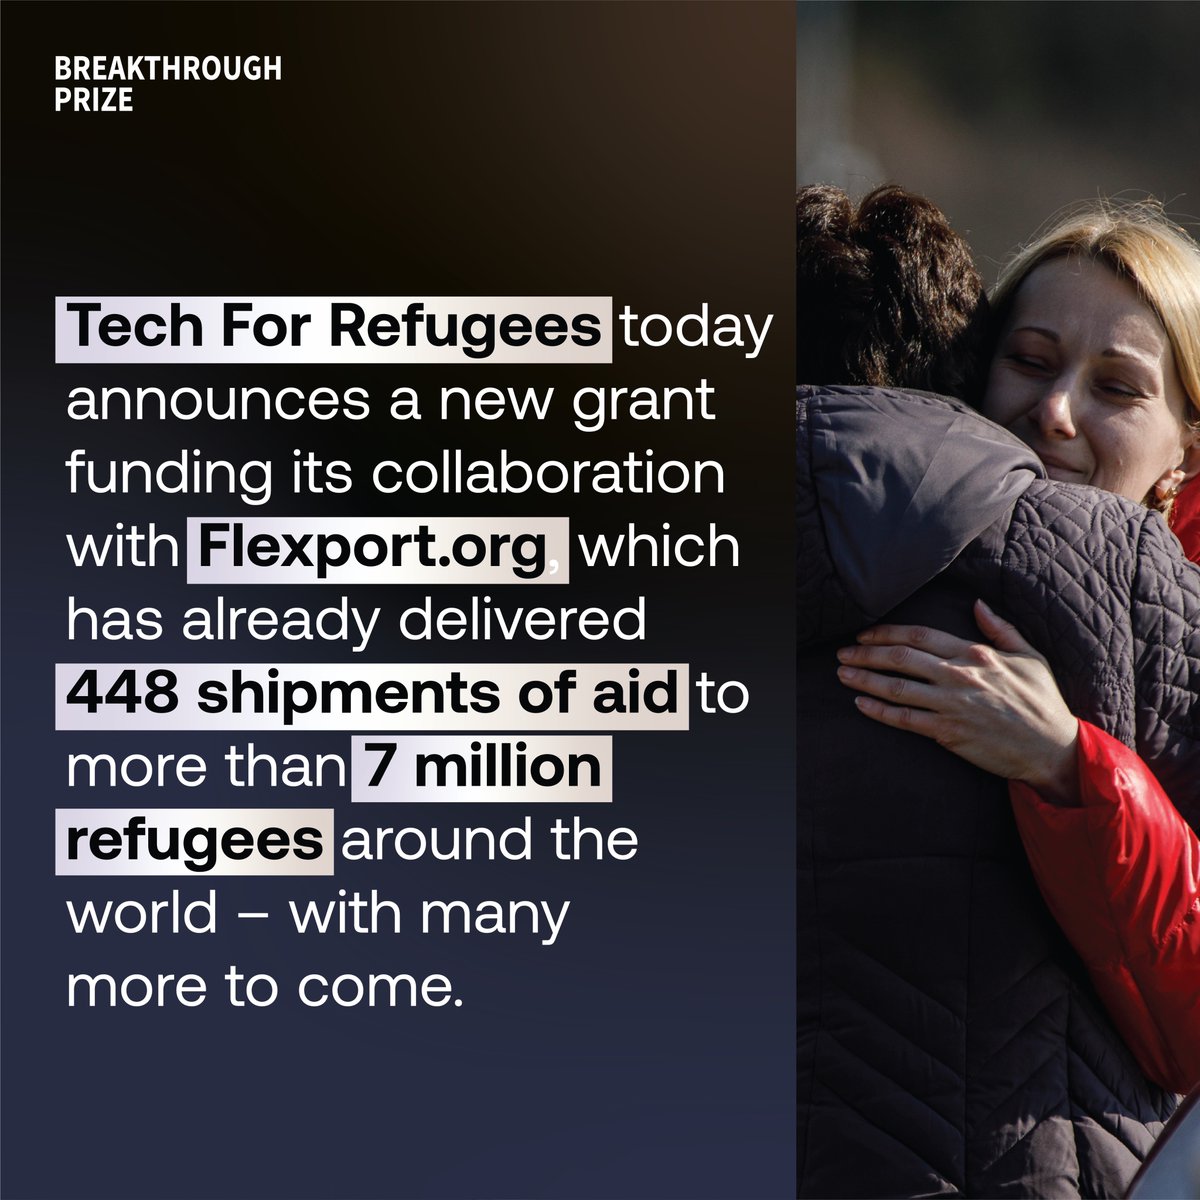 Tech For Refugees today announces a new grant funding its collaboration with Flexport.org, which has already delivered 448 shipments of aid to more than 7 million refugees around the world – with many more to come. techforrefugees.org/news/13